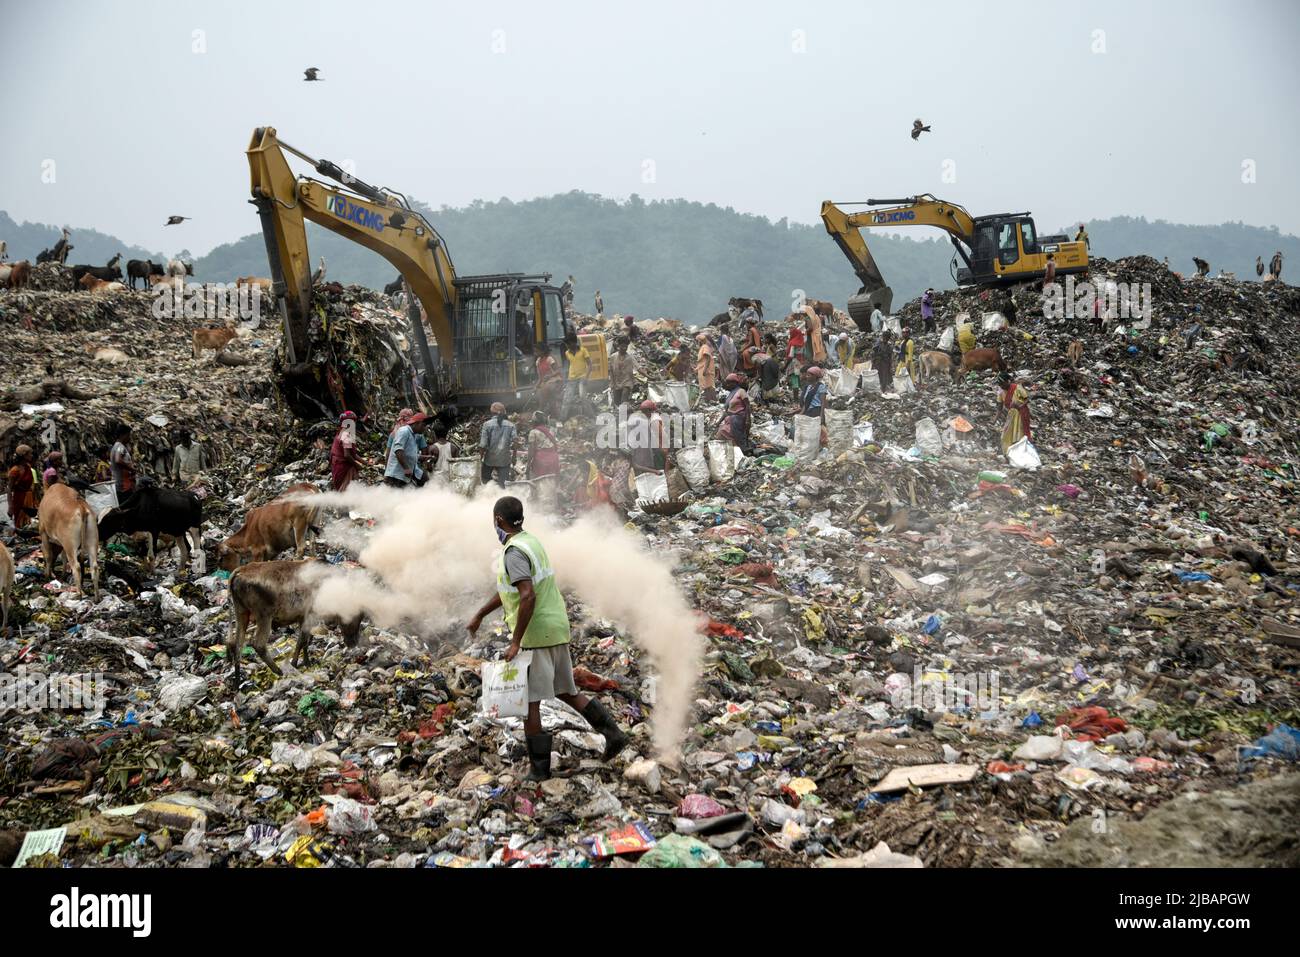 Municipality workers working with excavator as rag pickers searches for recyclable materials next to cows and birds at a garbage dumpsite, in Guwahati, Assam, India on 04 June 2022. World Environment Day 2022 is the biggest international day for the environment. Led by the United Nations Environment Programme (UNEP) on 05 June every year. Credit: David Talukdar/Alamy Live News Stock Photo